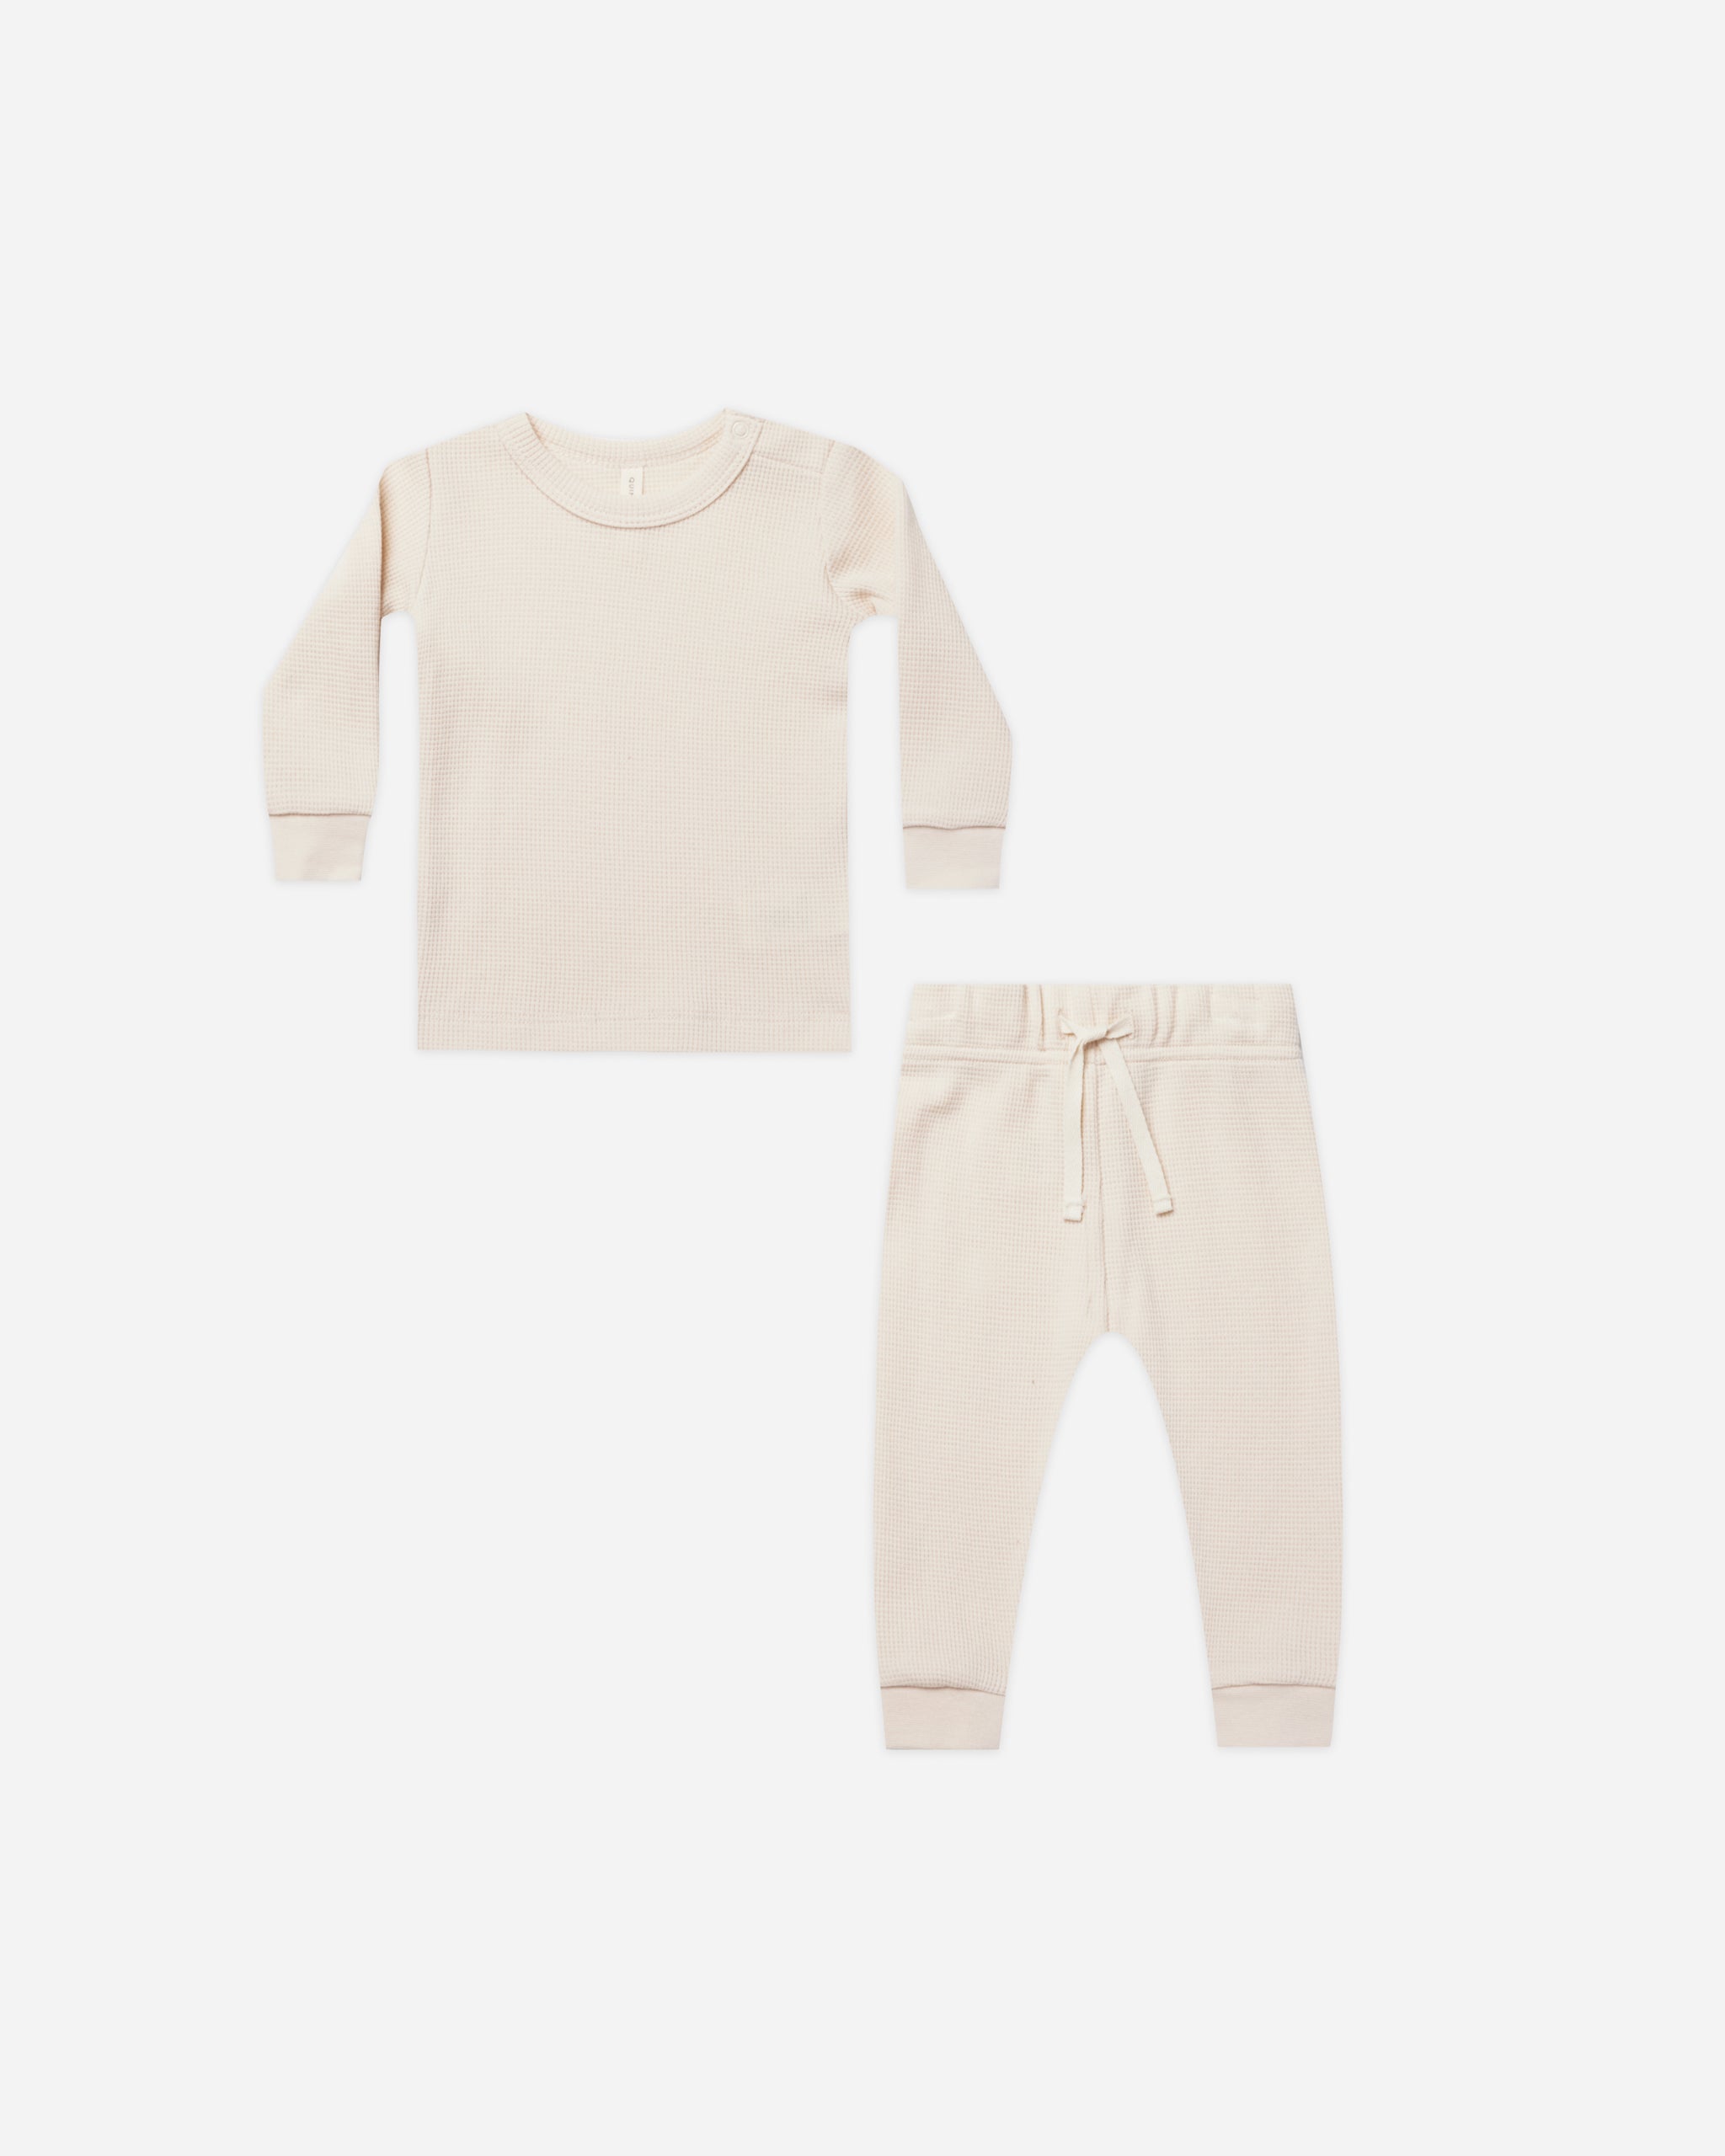 Waffle Top + Pant Set || Natural - Rylee + Cru | Kids Clothes | Trendy Baby Clothes | Modern Infant Outfits |